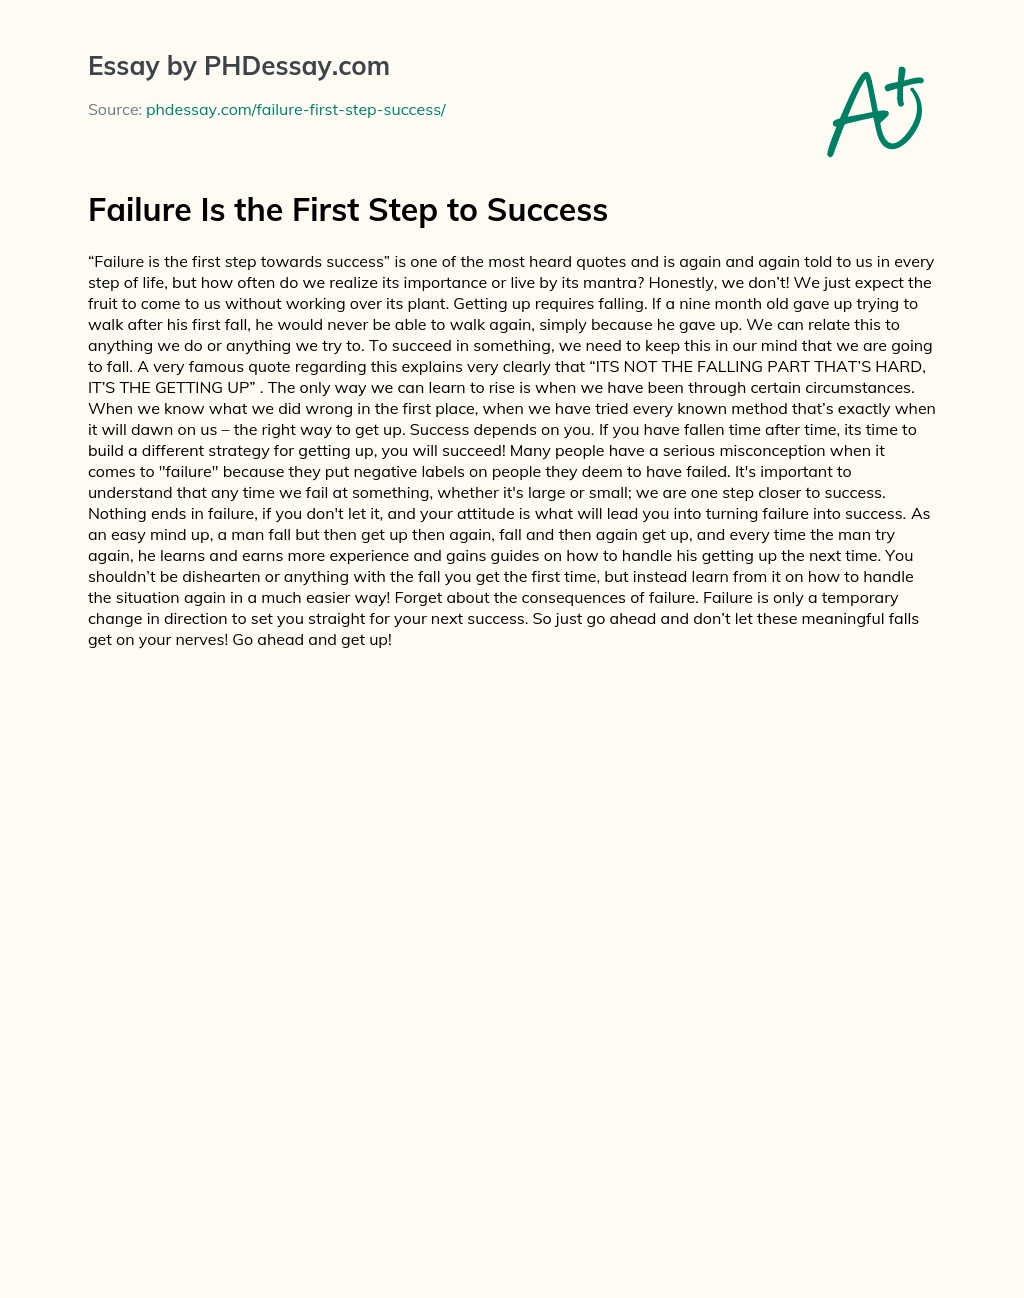 Failure Is the First Step to Success essay